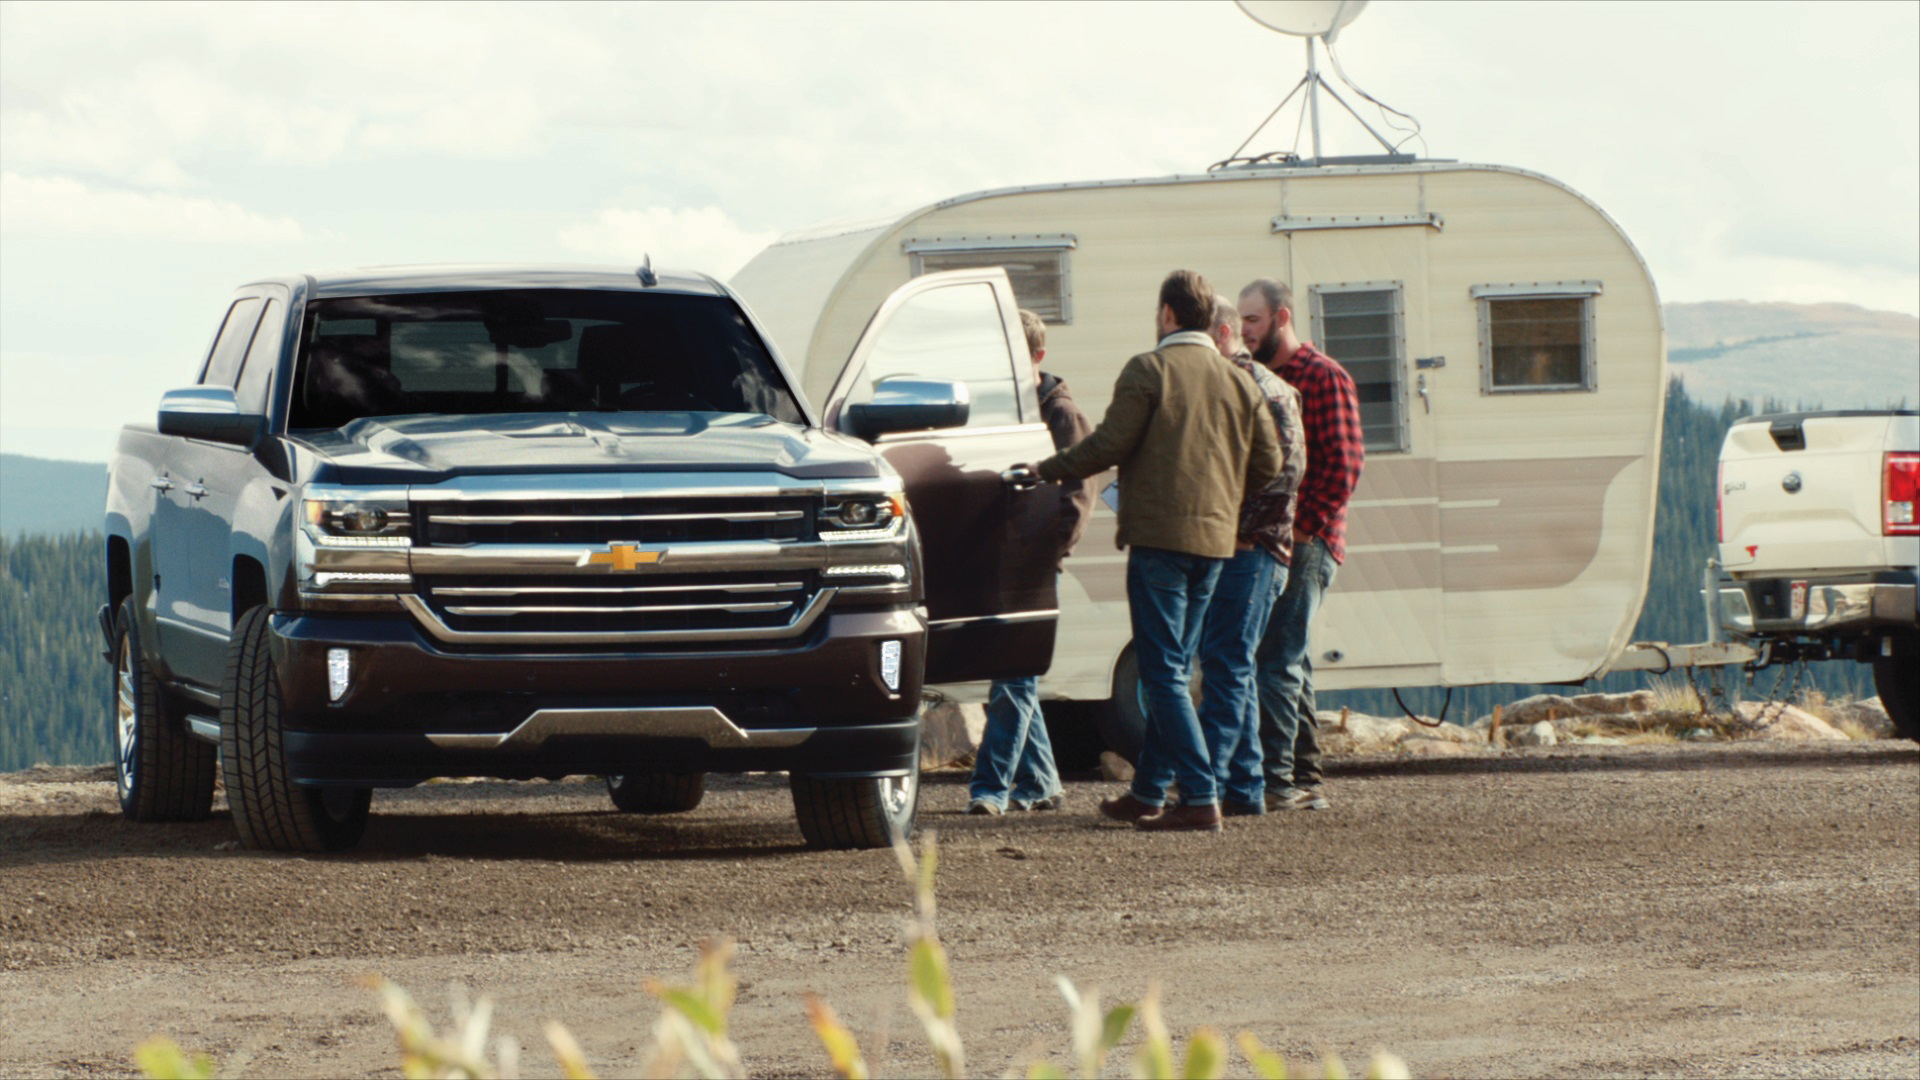 Chevrolet’s new spot “Mobile Office” continues the “Real People, Not Actors” campaign, offering © General Motors